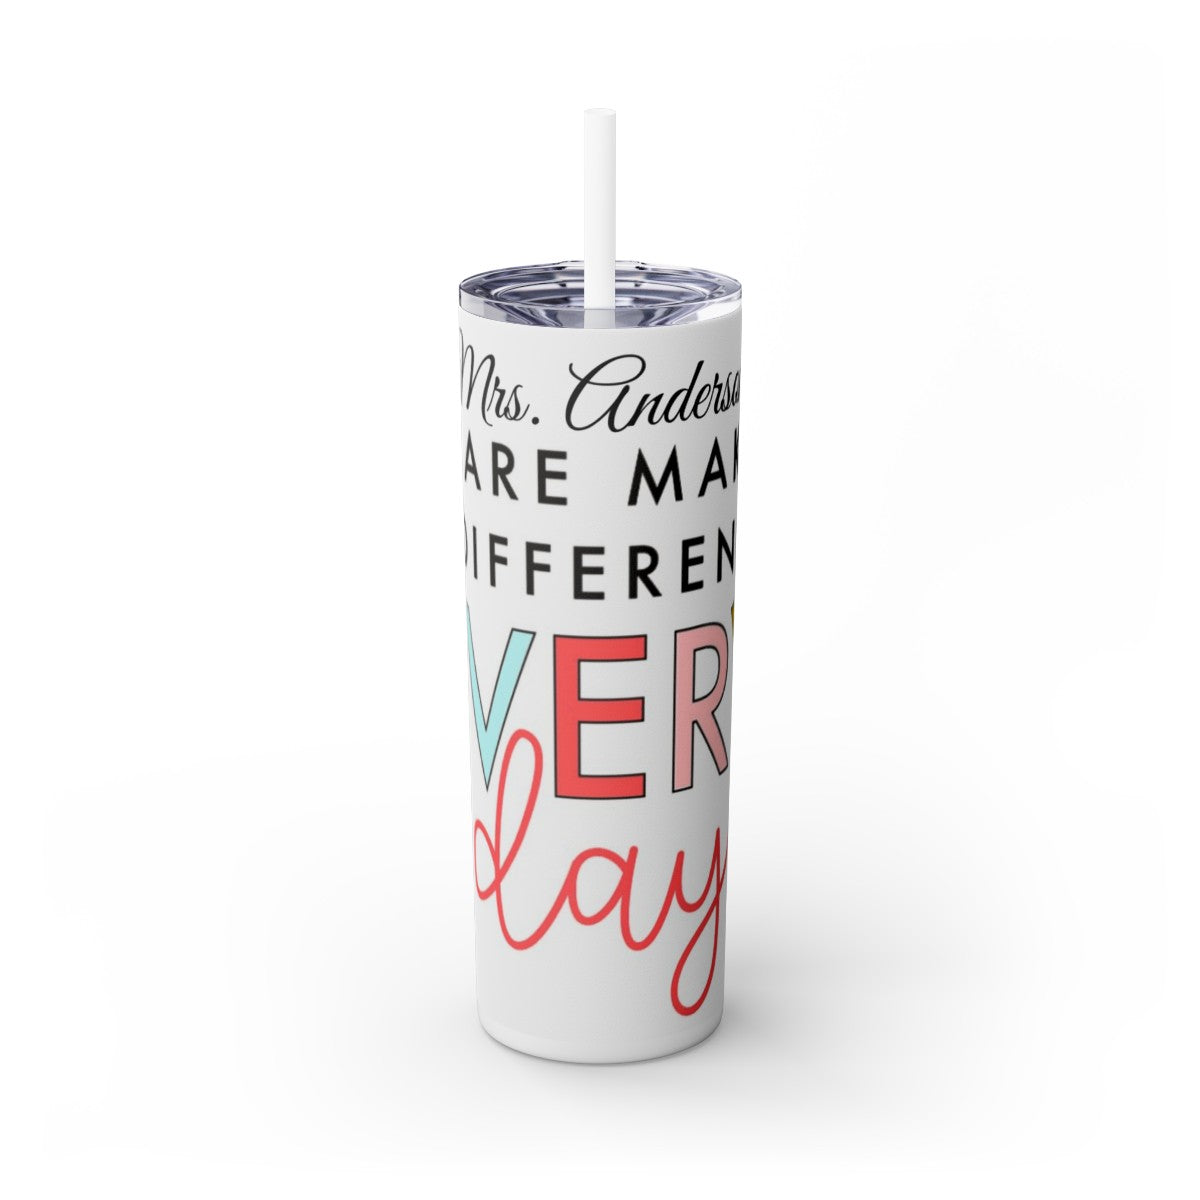 Get trendy with You Make a difference Every Day Skinny Tumbler with Straw, 20oz -  available at Good Gift Company. Grab yours for $44.20 today!